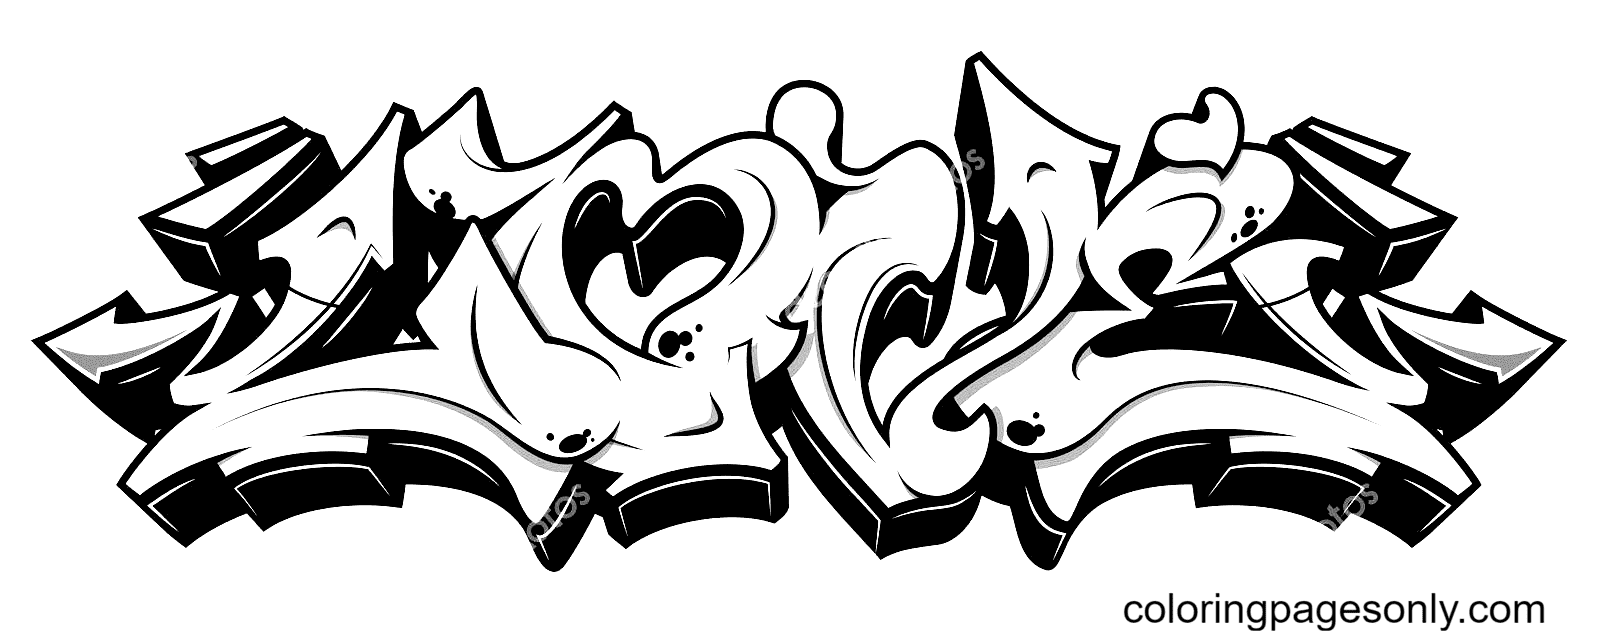 Graffiti Coloring Pages - Free Printable Coloring Pages